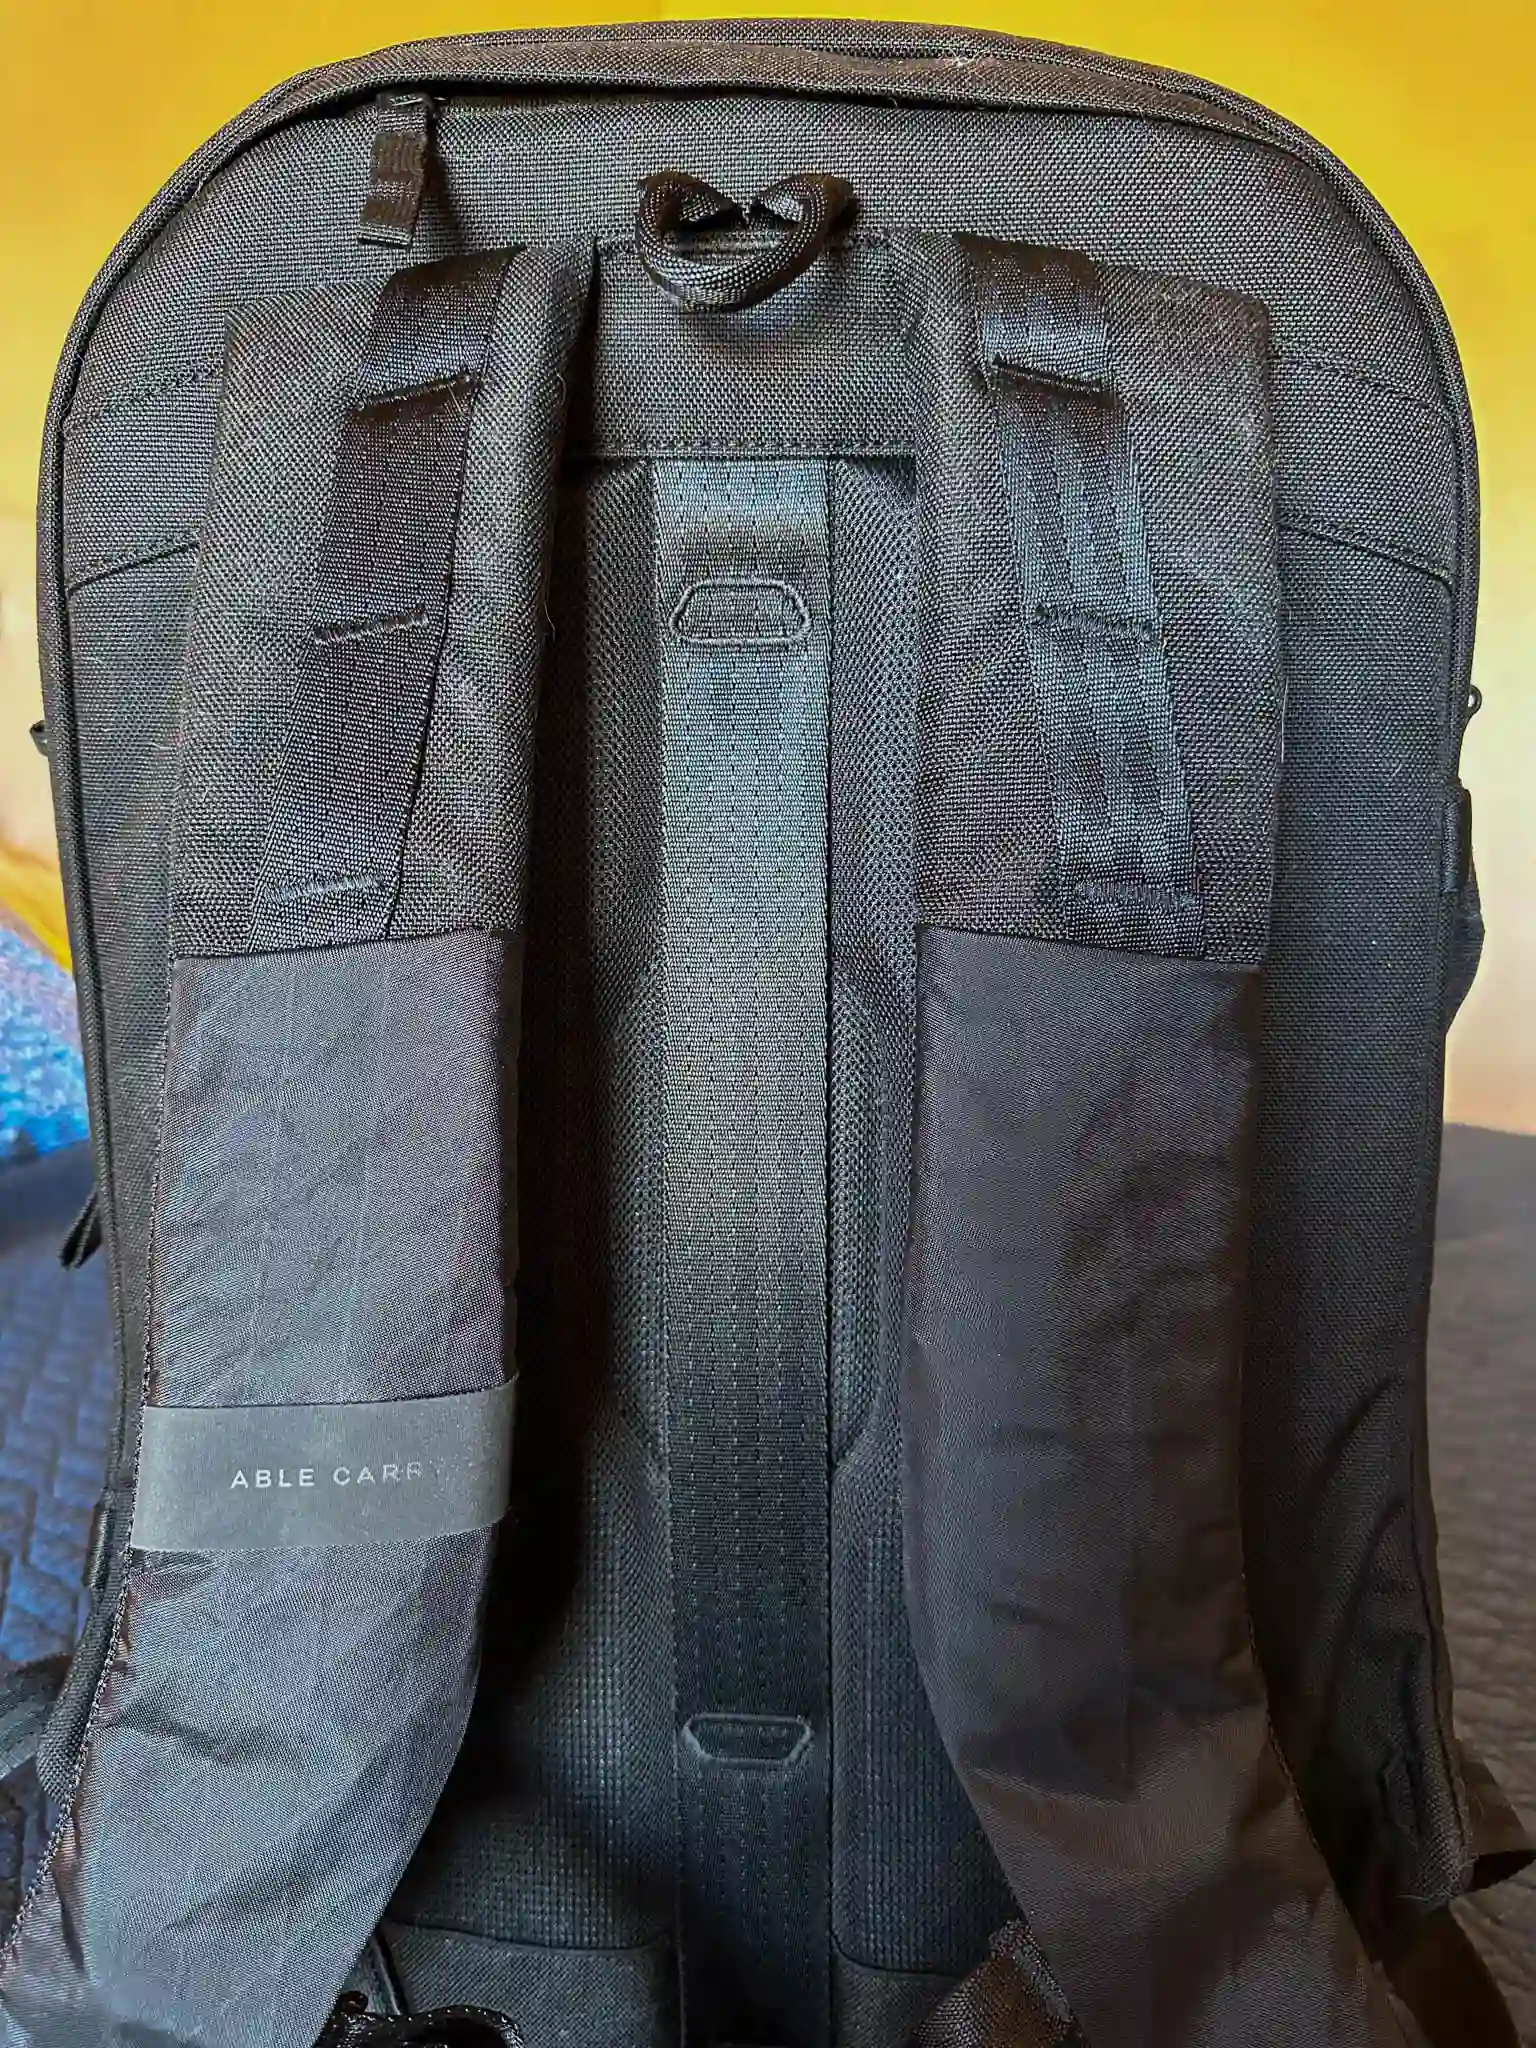 The back panel on the Able Carry Max